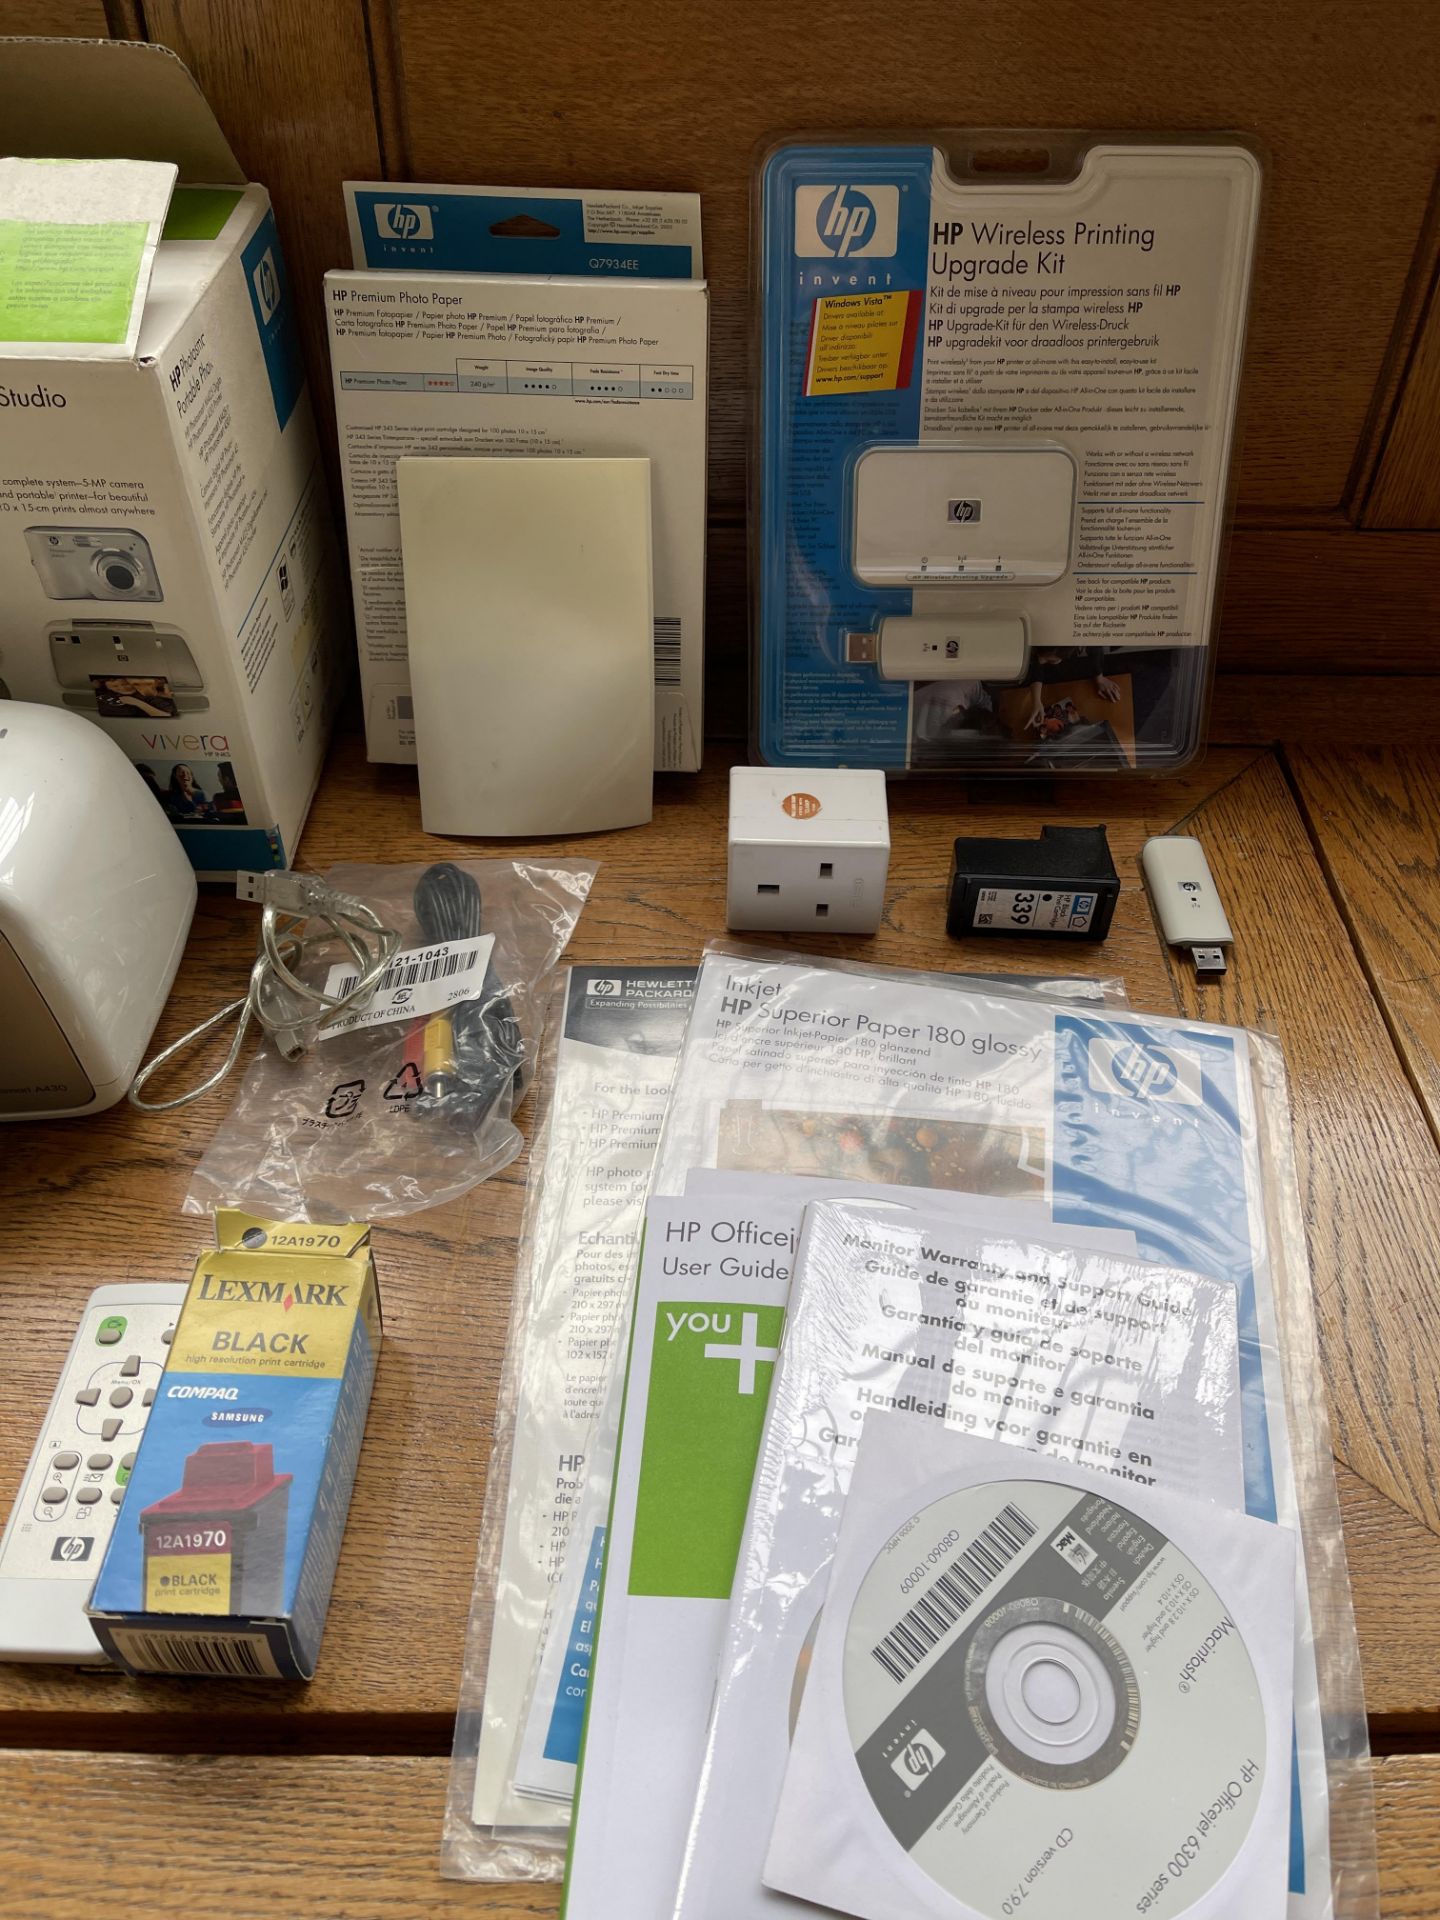 HP PORTABLE PHOTO PRINTER + NEW WIRELESS KIT AND PHOTO PAPER SEALED - Image 2 of 3